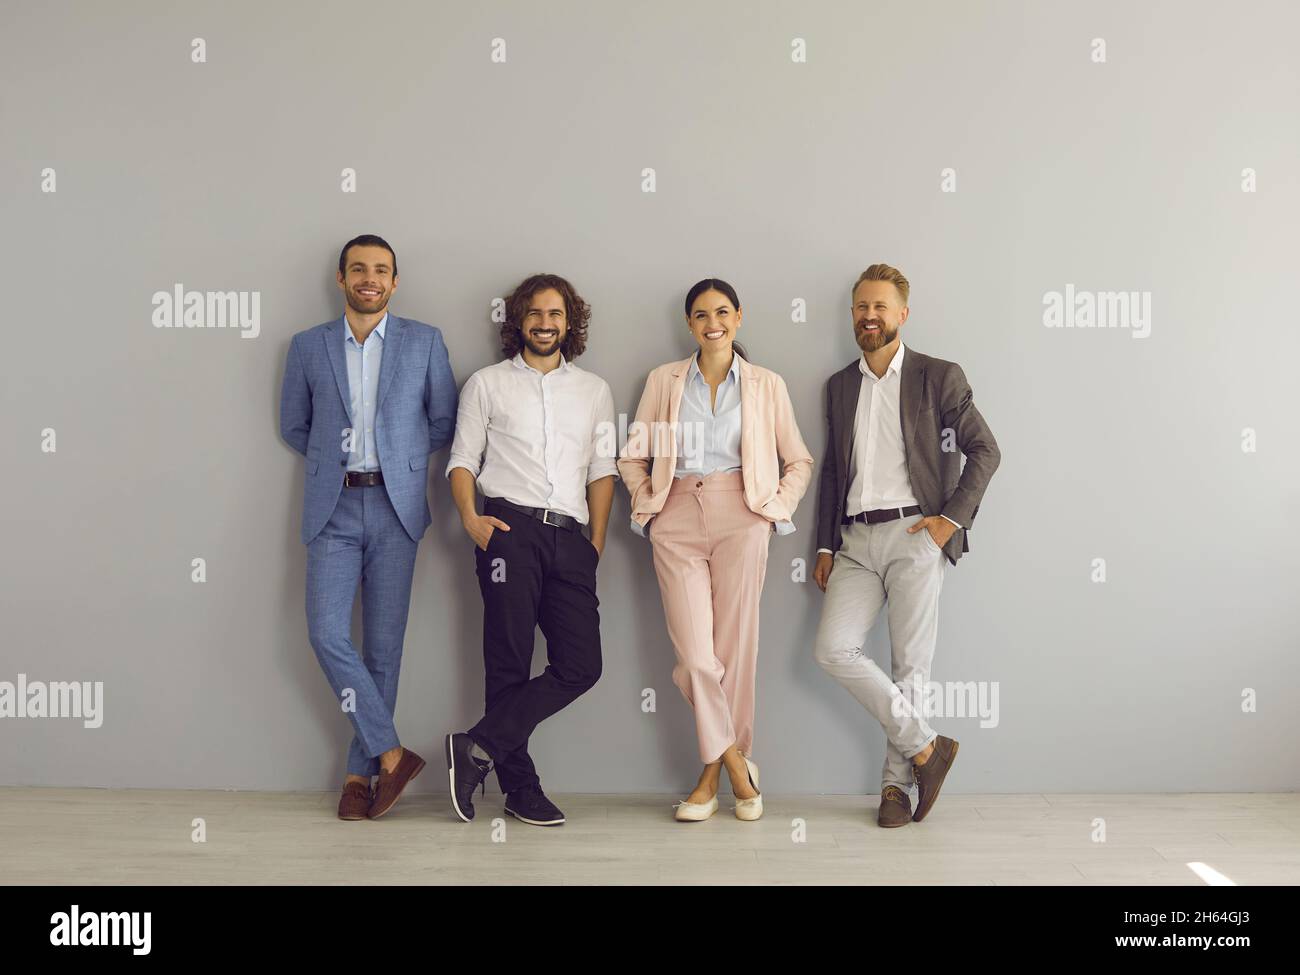 Group portrait of happy successful young business people standing by studio wall Stock Photo